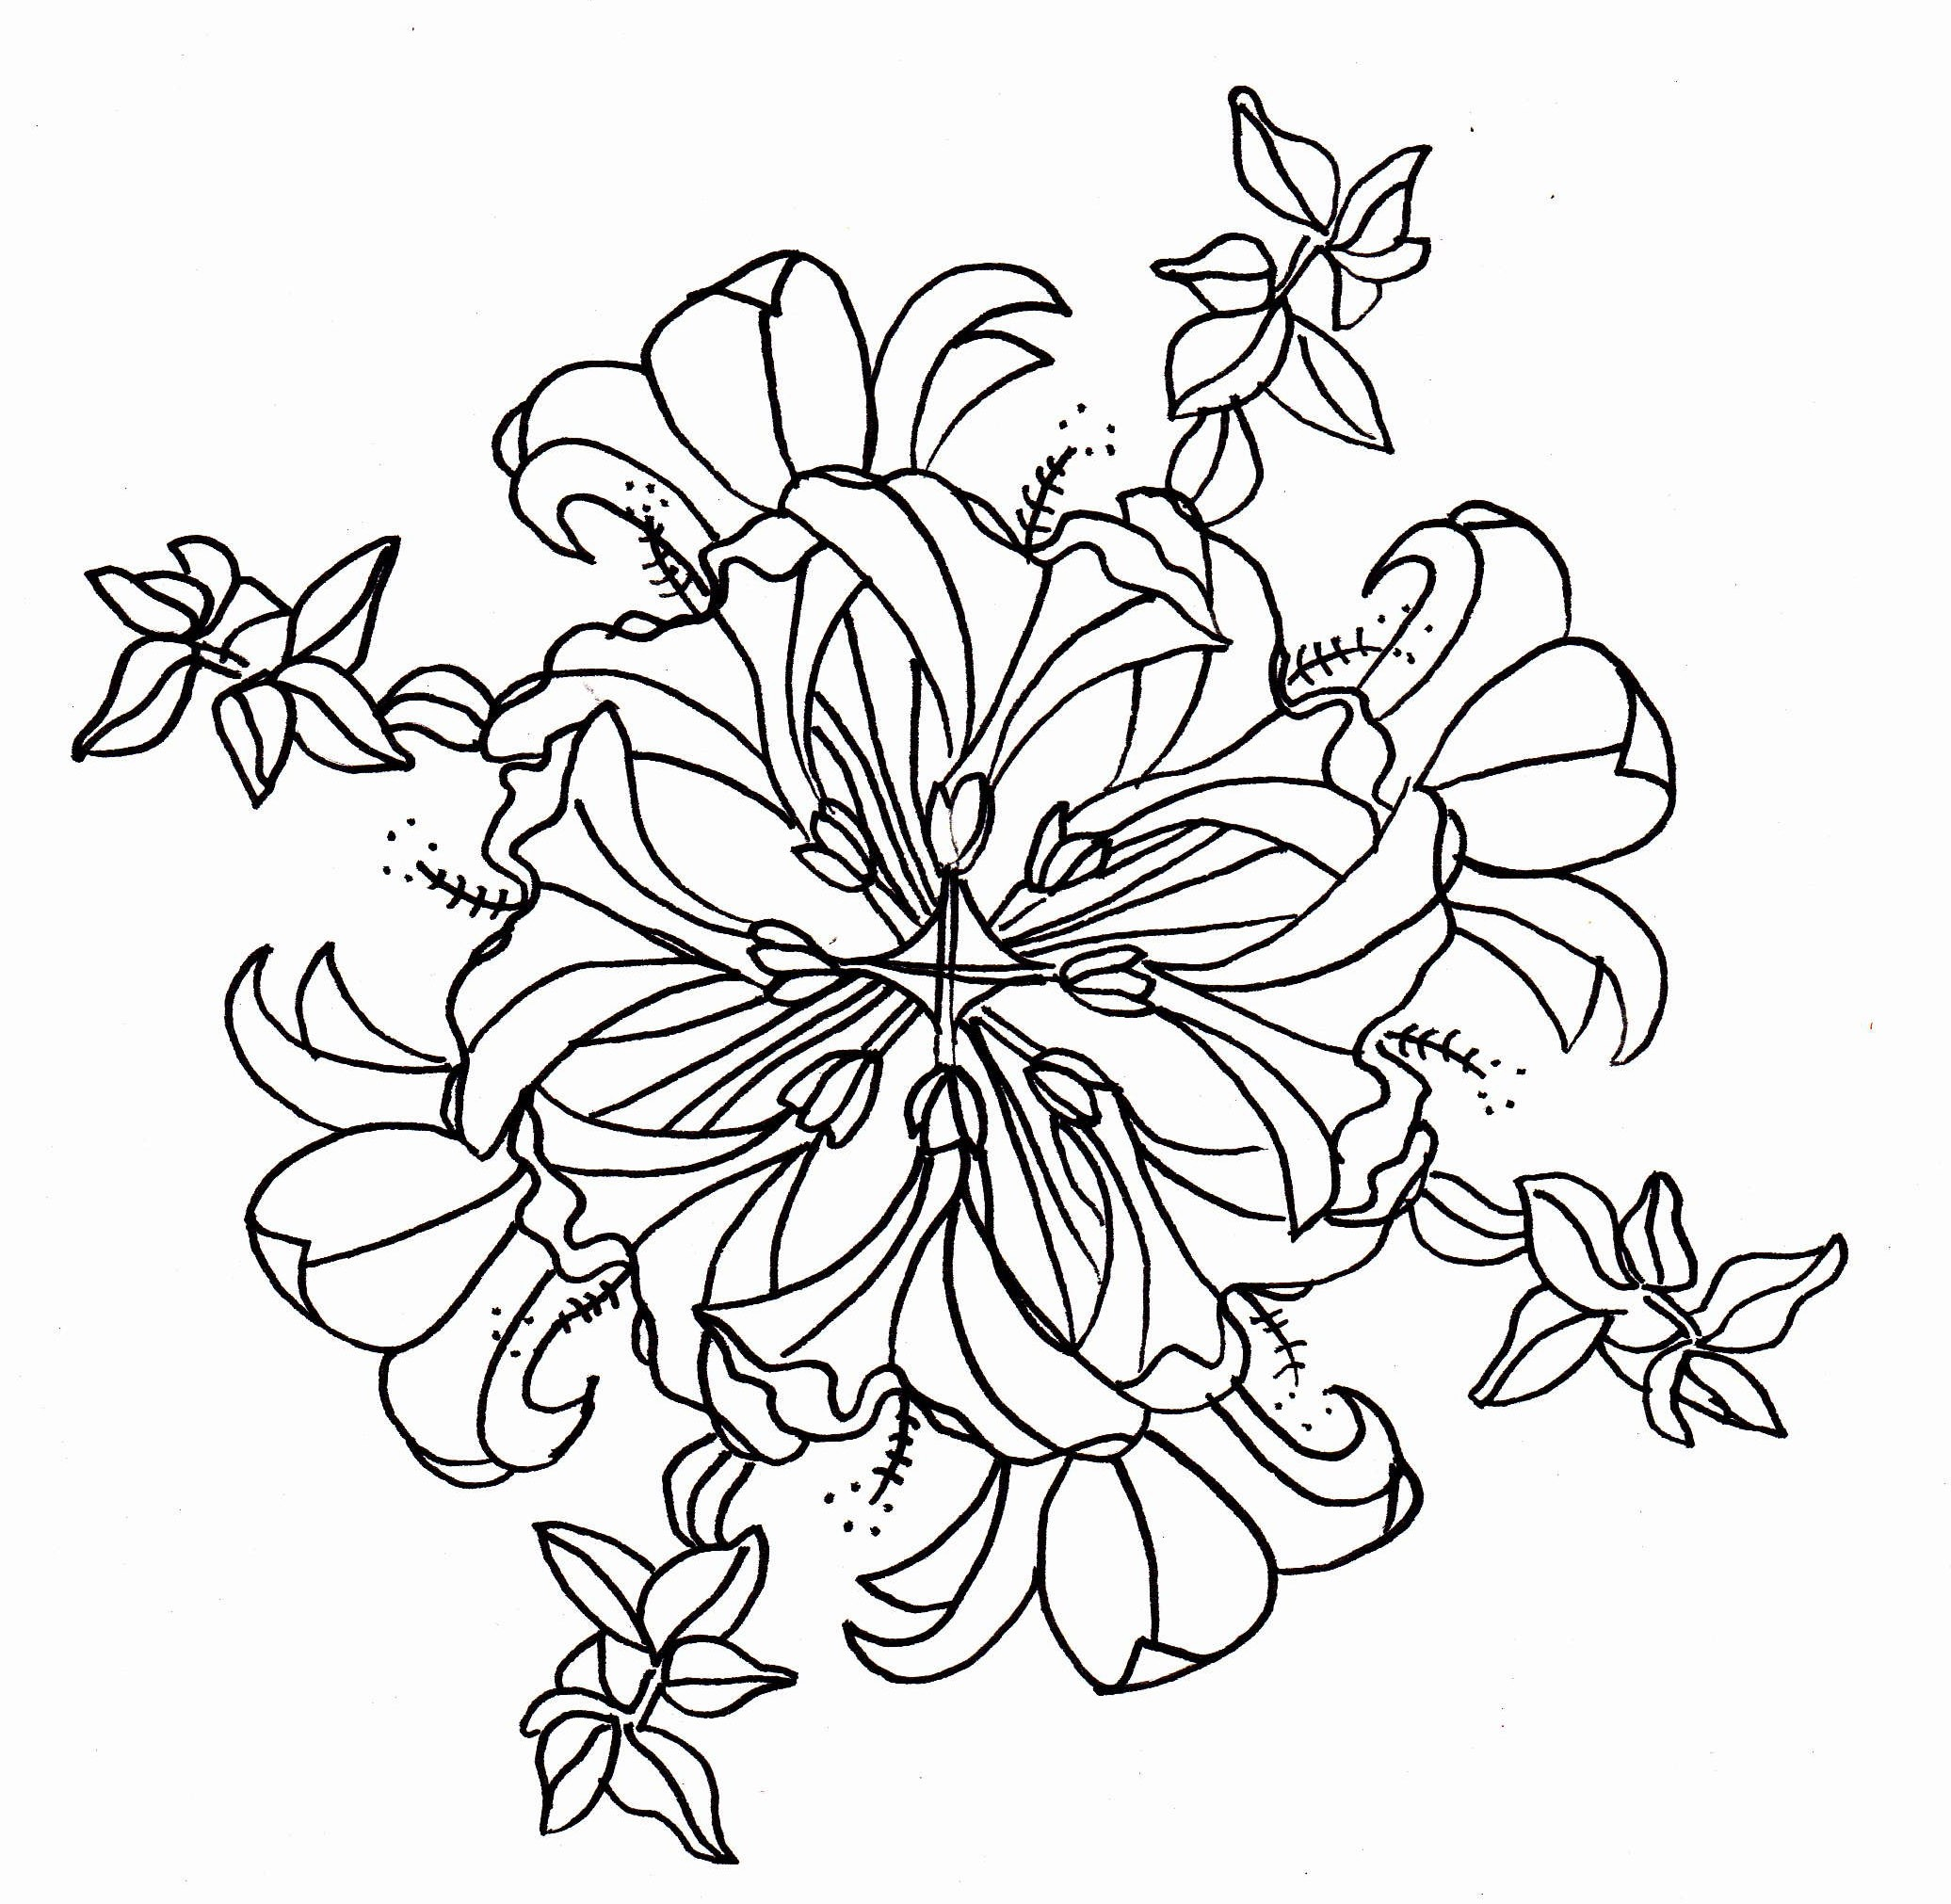 Hibiscus Flower Coloring Pages Hibiscus Line Drawing At Getdrawings Free For Personal Use